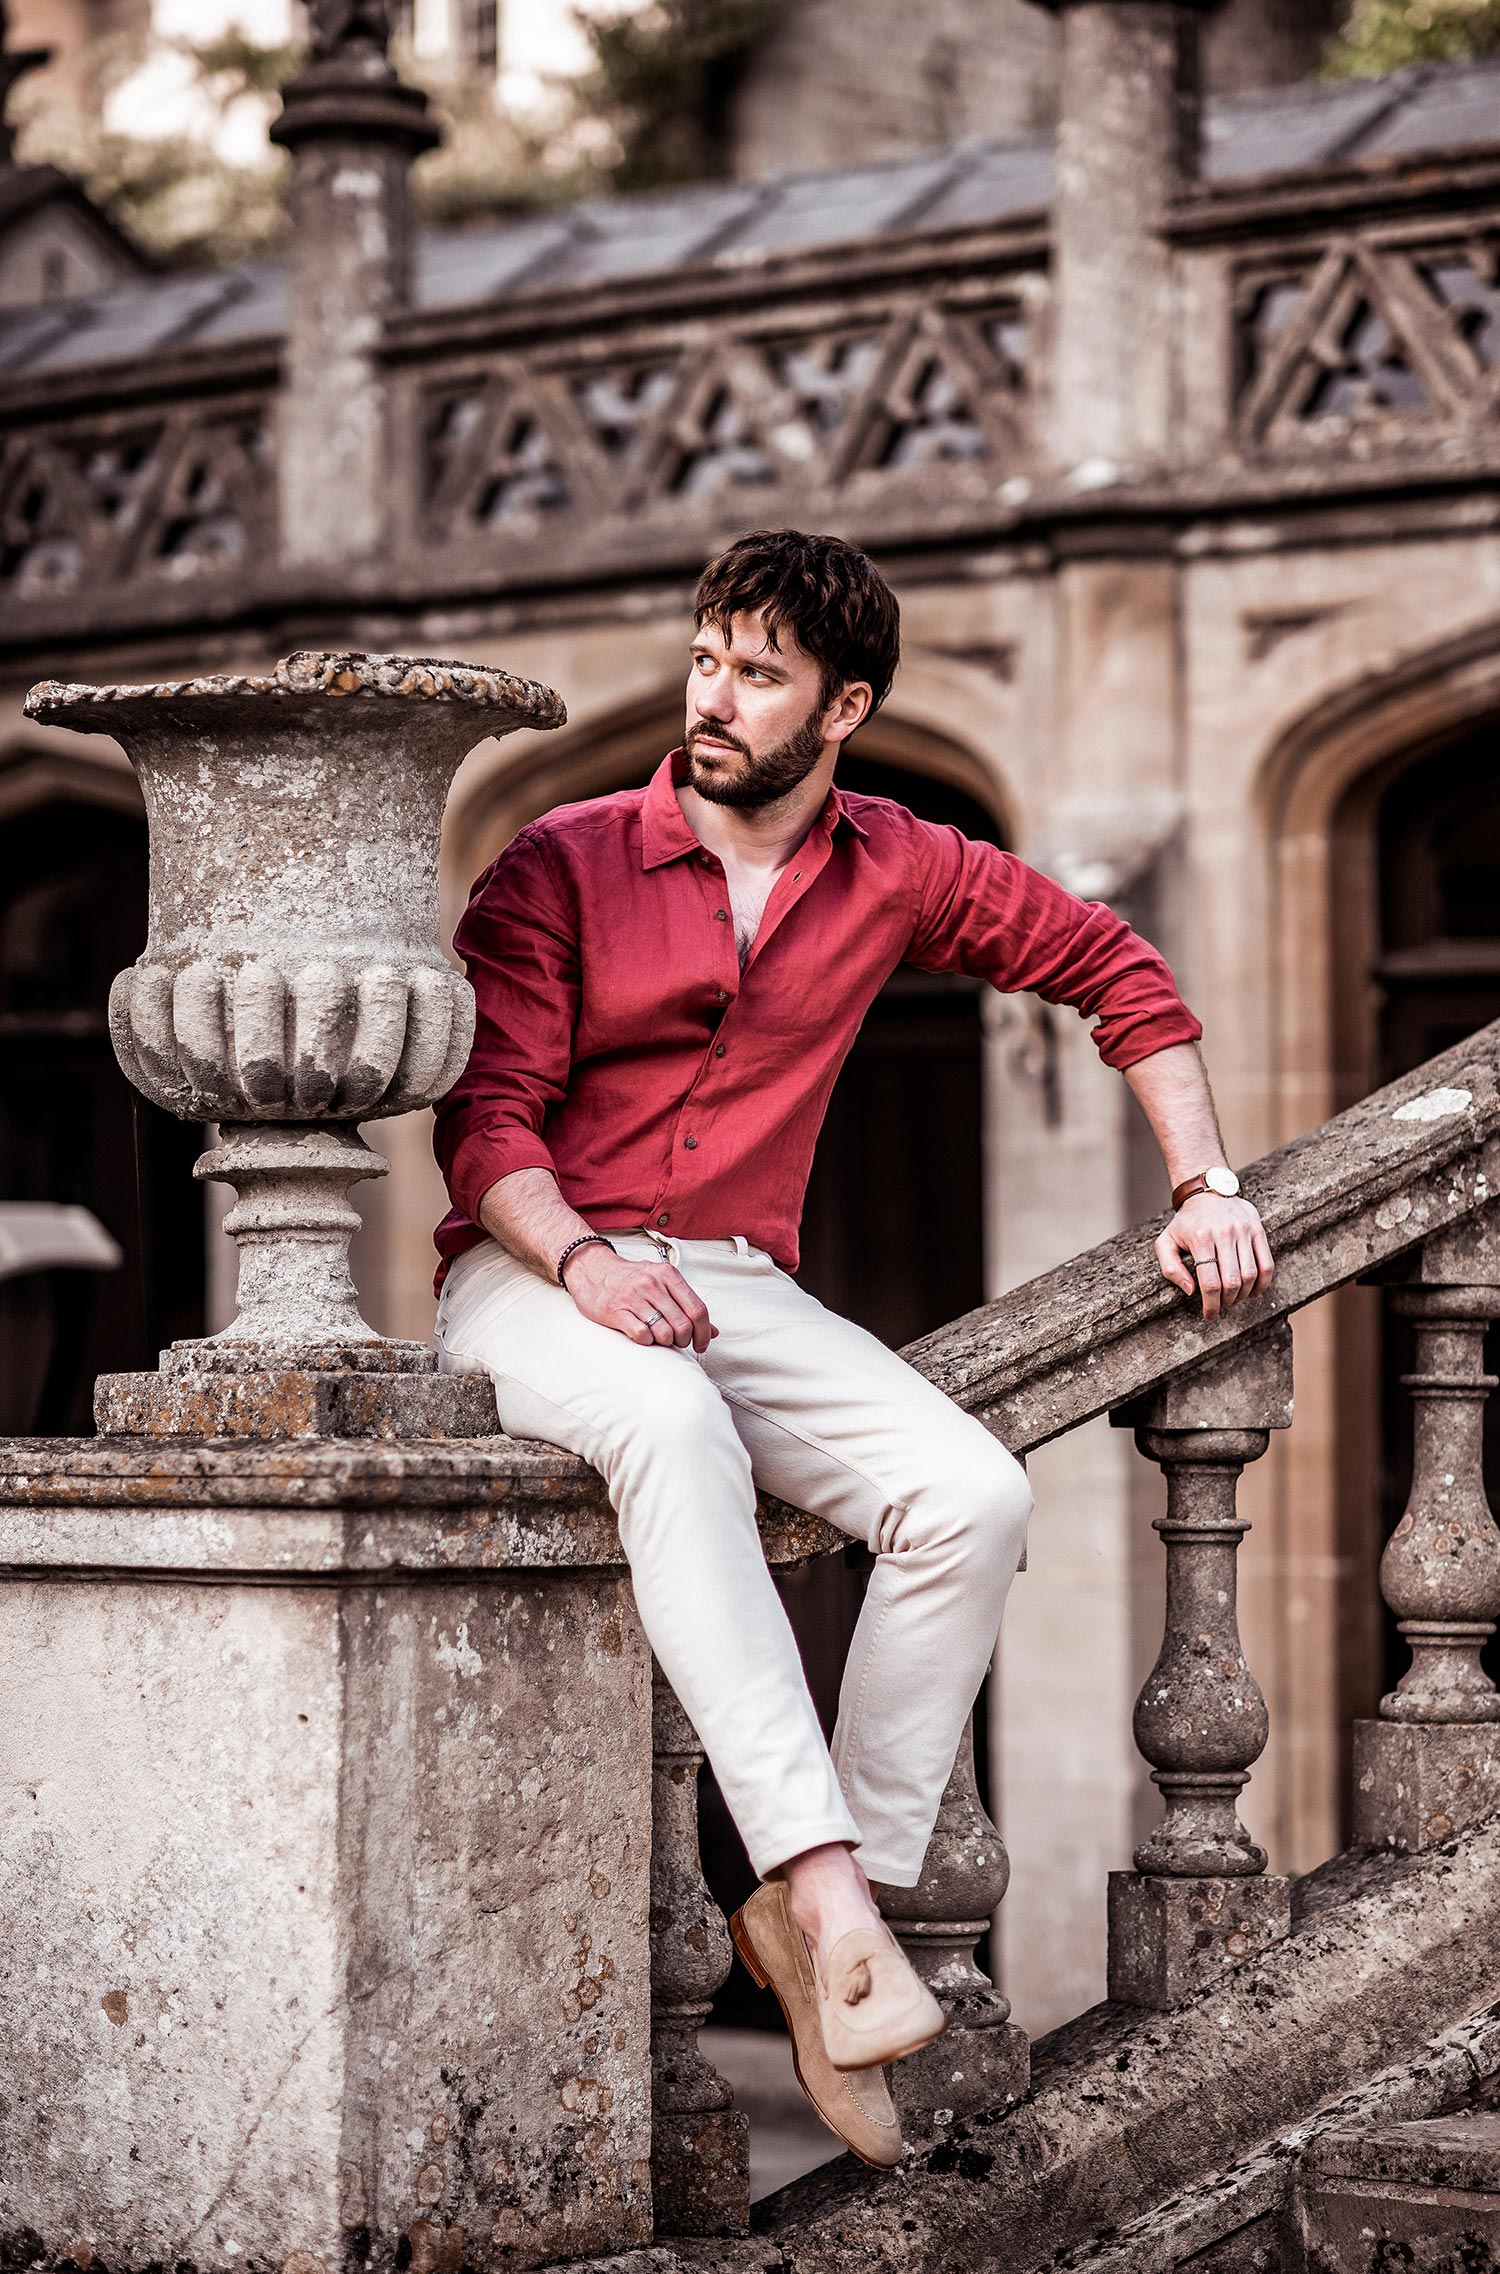 Red Linen Shirt With Ecru Skinny Jeans Outfit - Your Average Guy